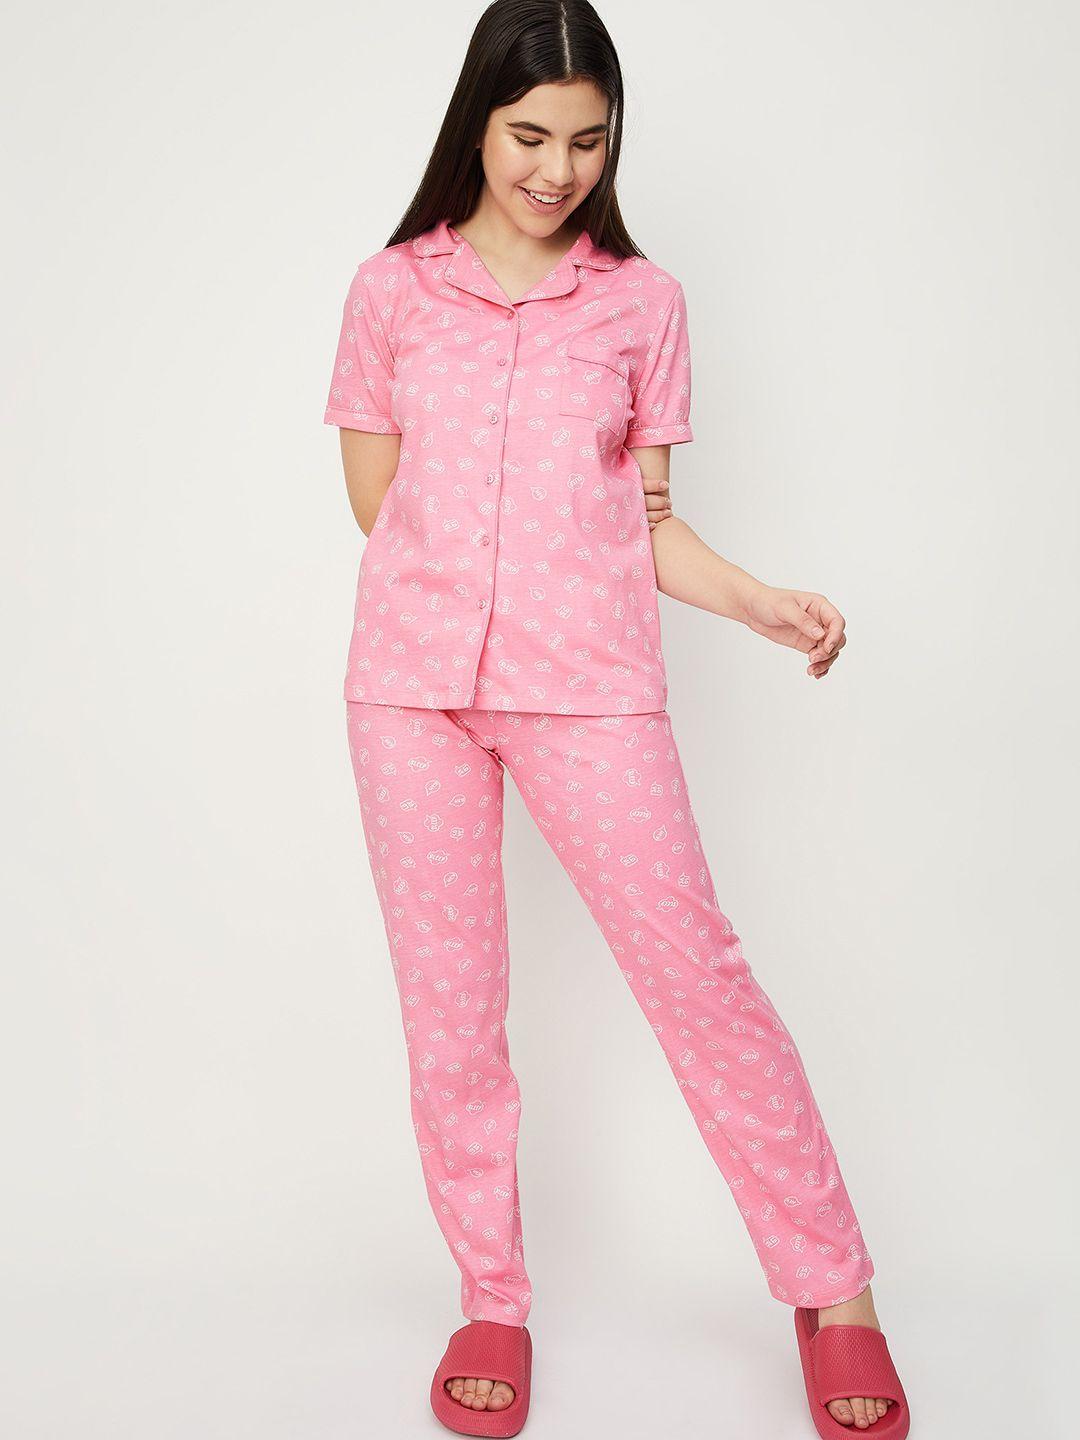 max graphic printed pure cotton night suit